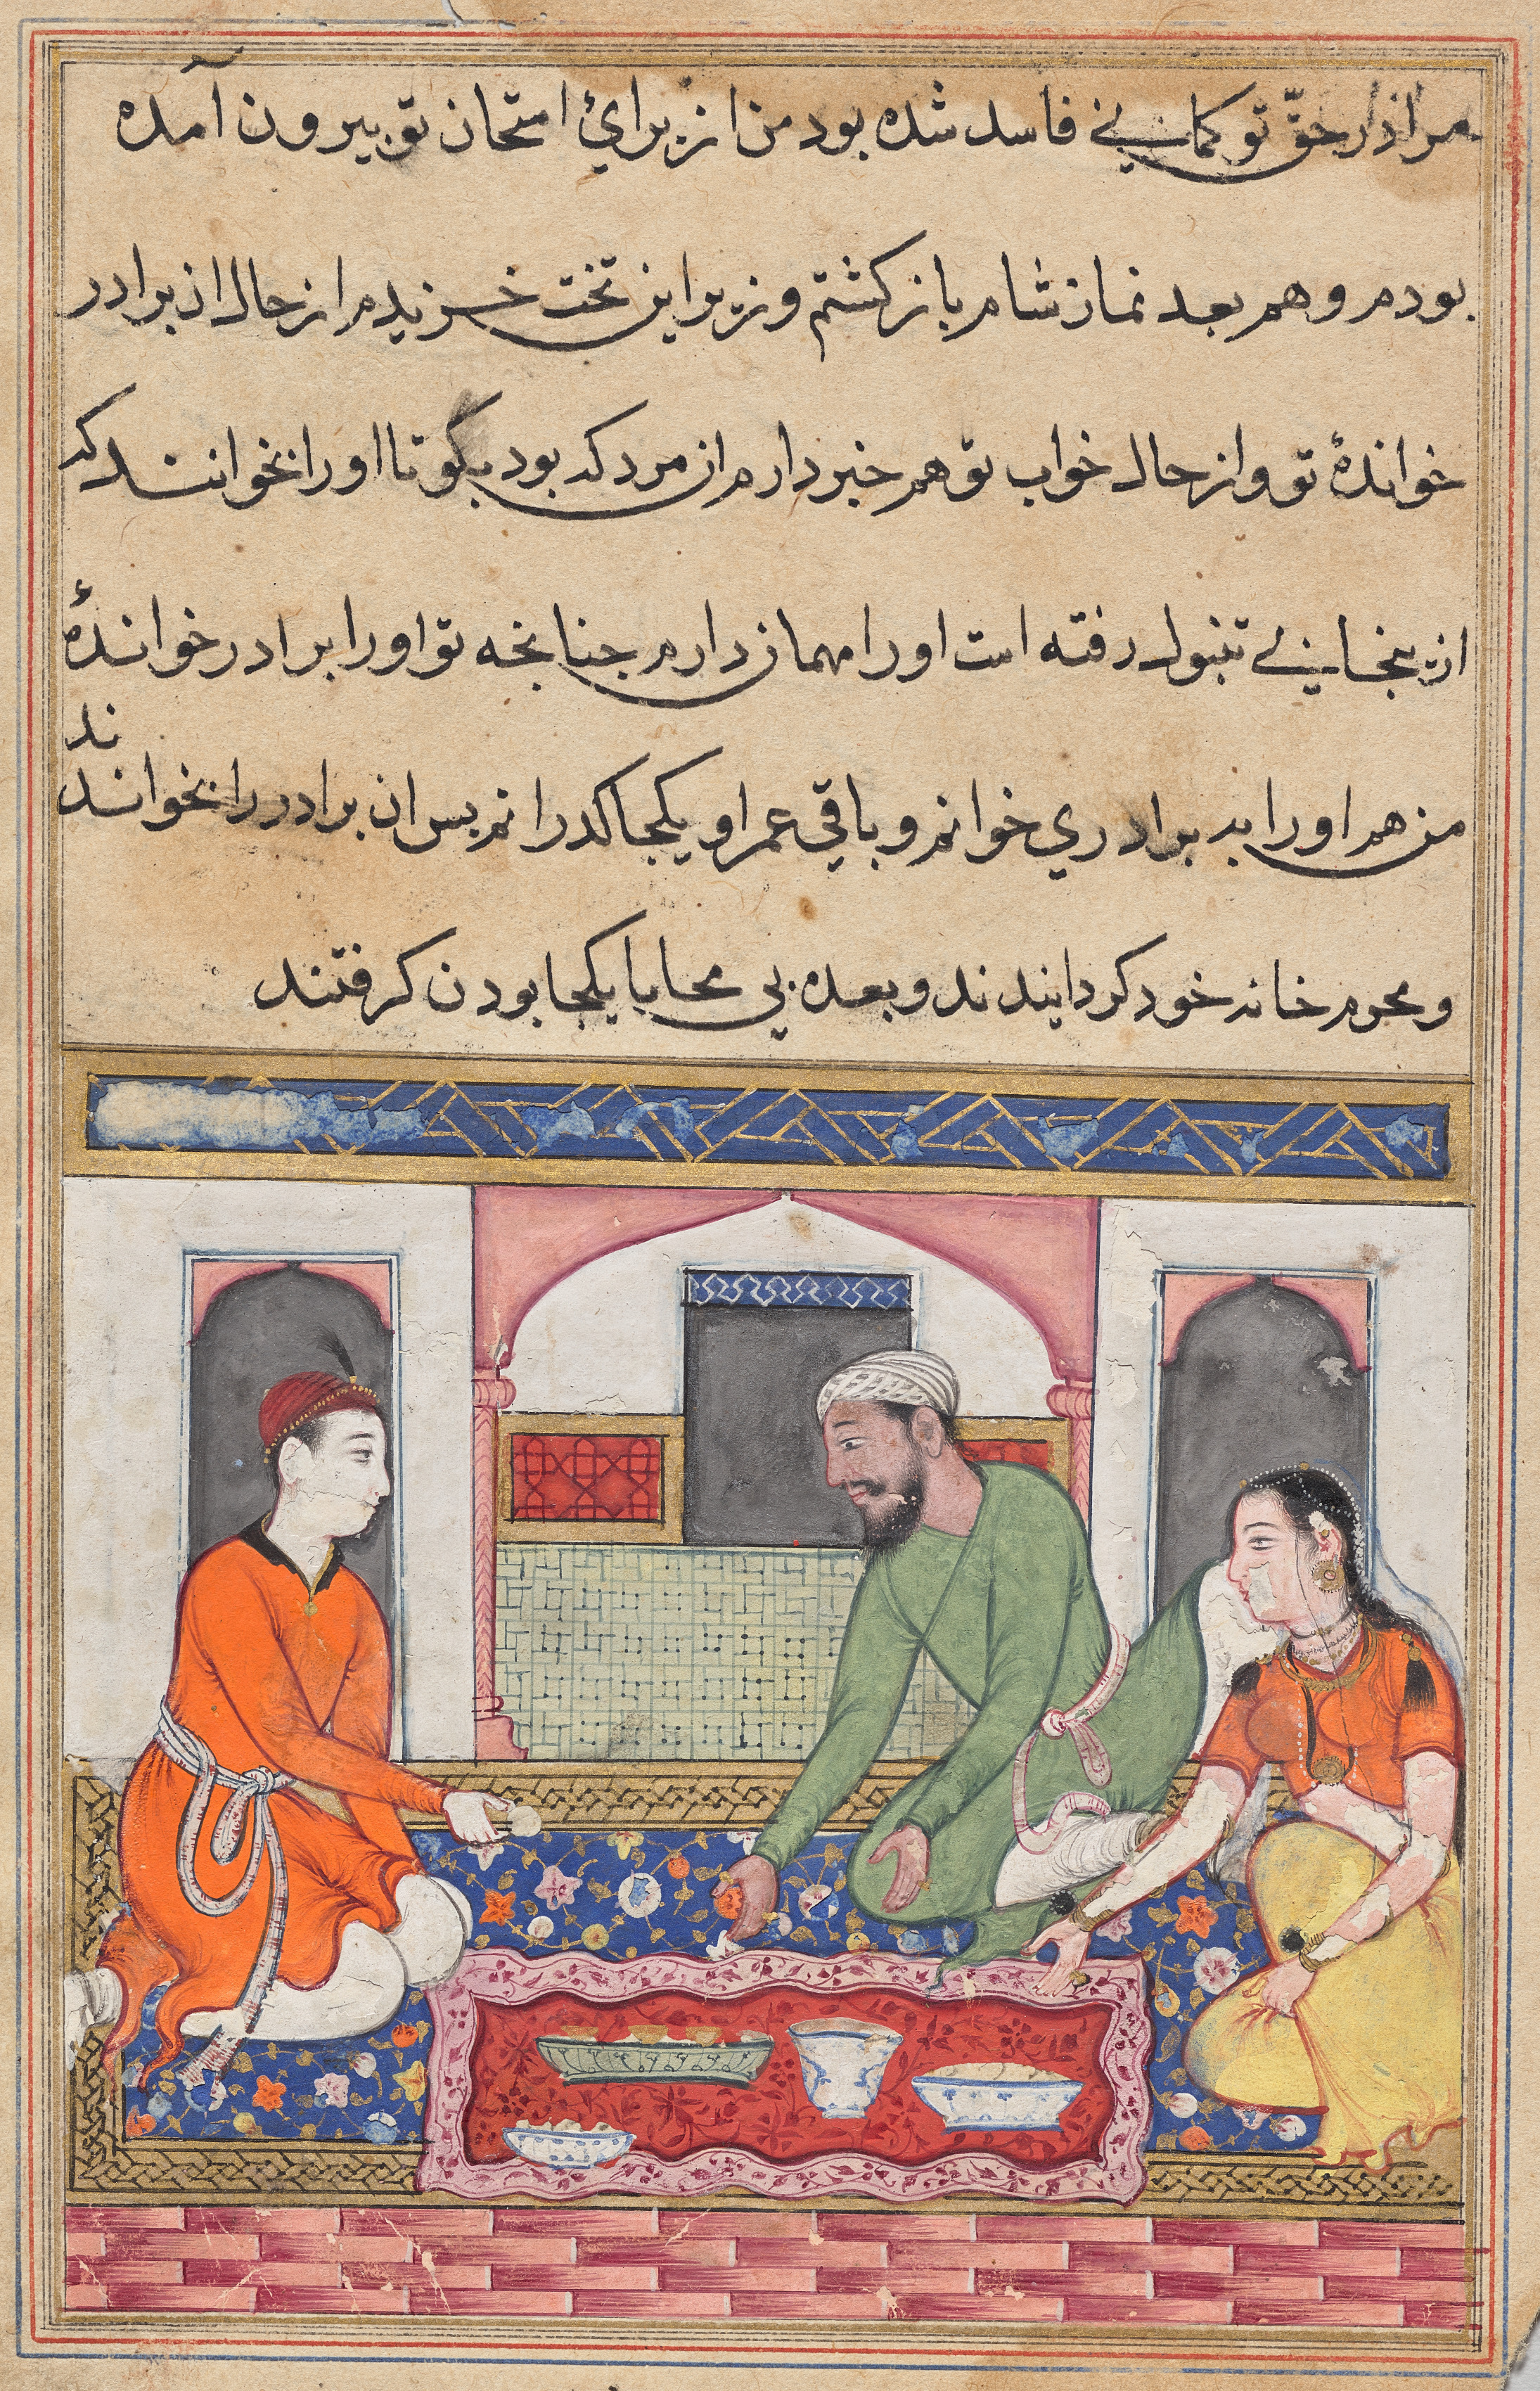 Shahr-Arai and her husband adopt her lover as a brother in the family, from a Tuti-nama (Tales of a Parrot): Fortieth Night